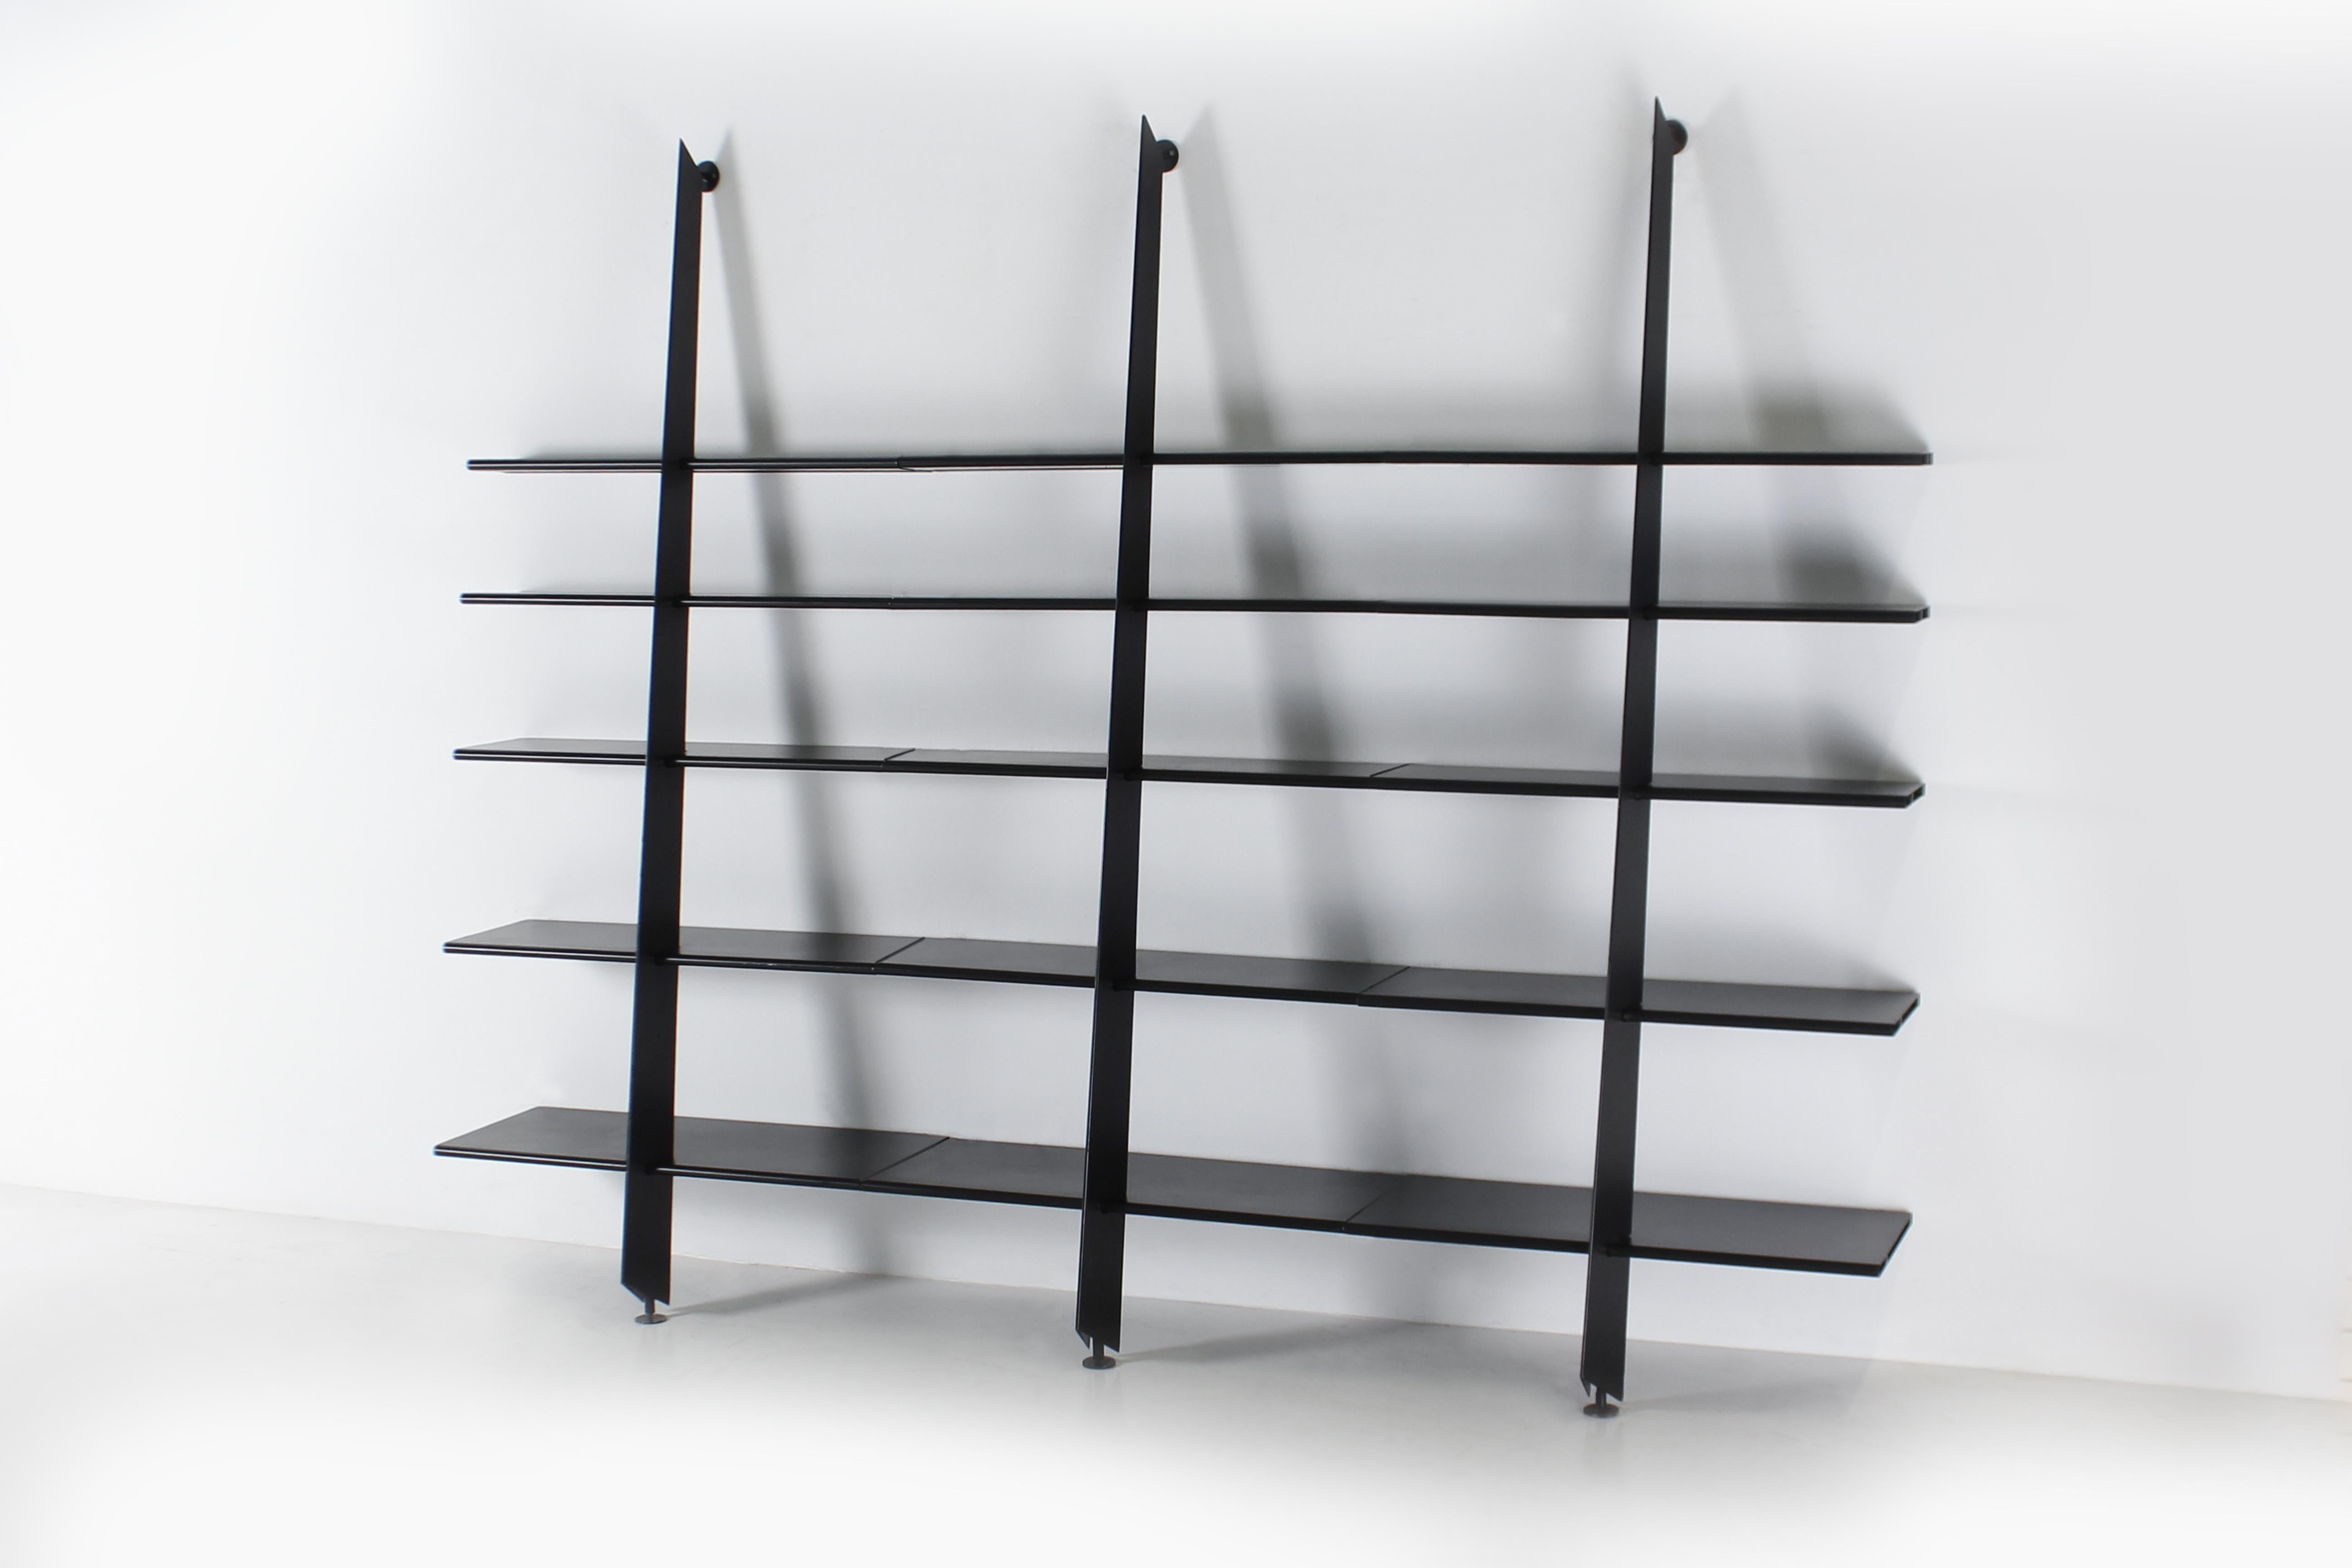 Mac Gee bookcases evoke the aerodynamic geometries of an airplane wing, and this three-piece set allows for modulation according to furniture needs with the option of aligning them to make up a single piece.  The steel structure consists of a